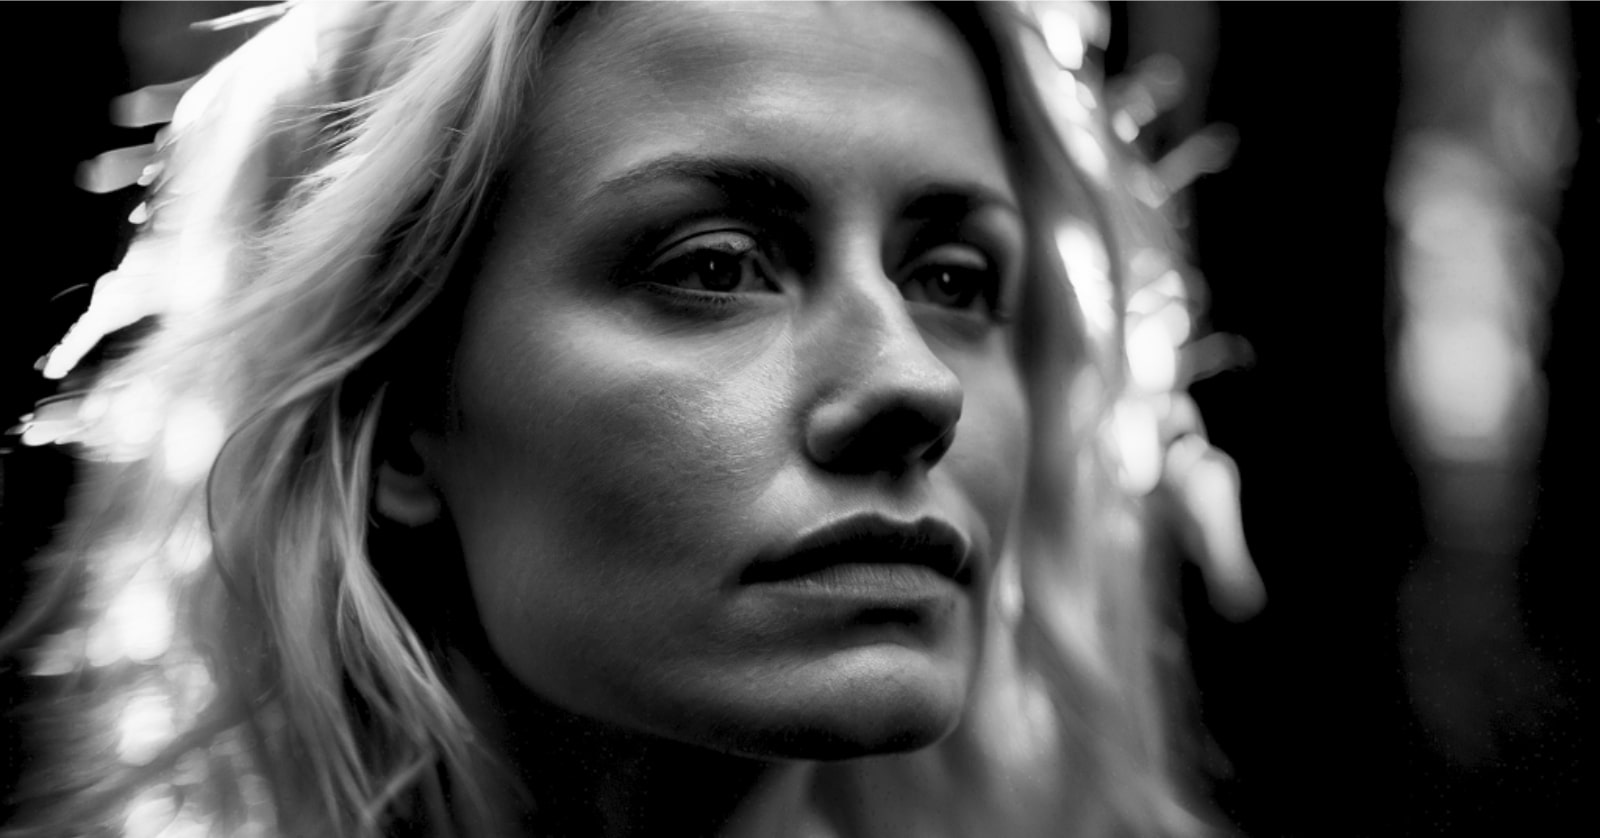 black and white photo of a pensive blonde woman, head and face only